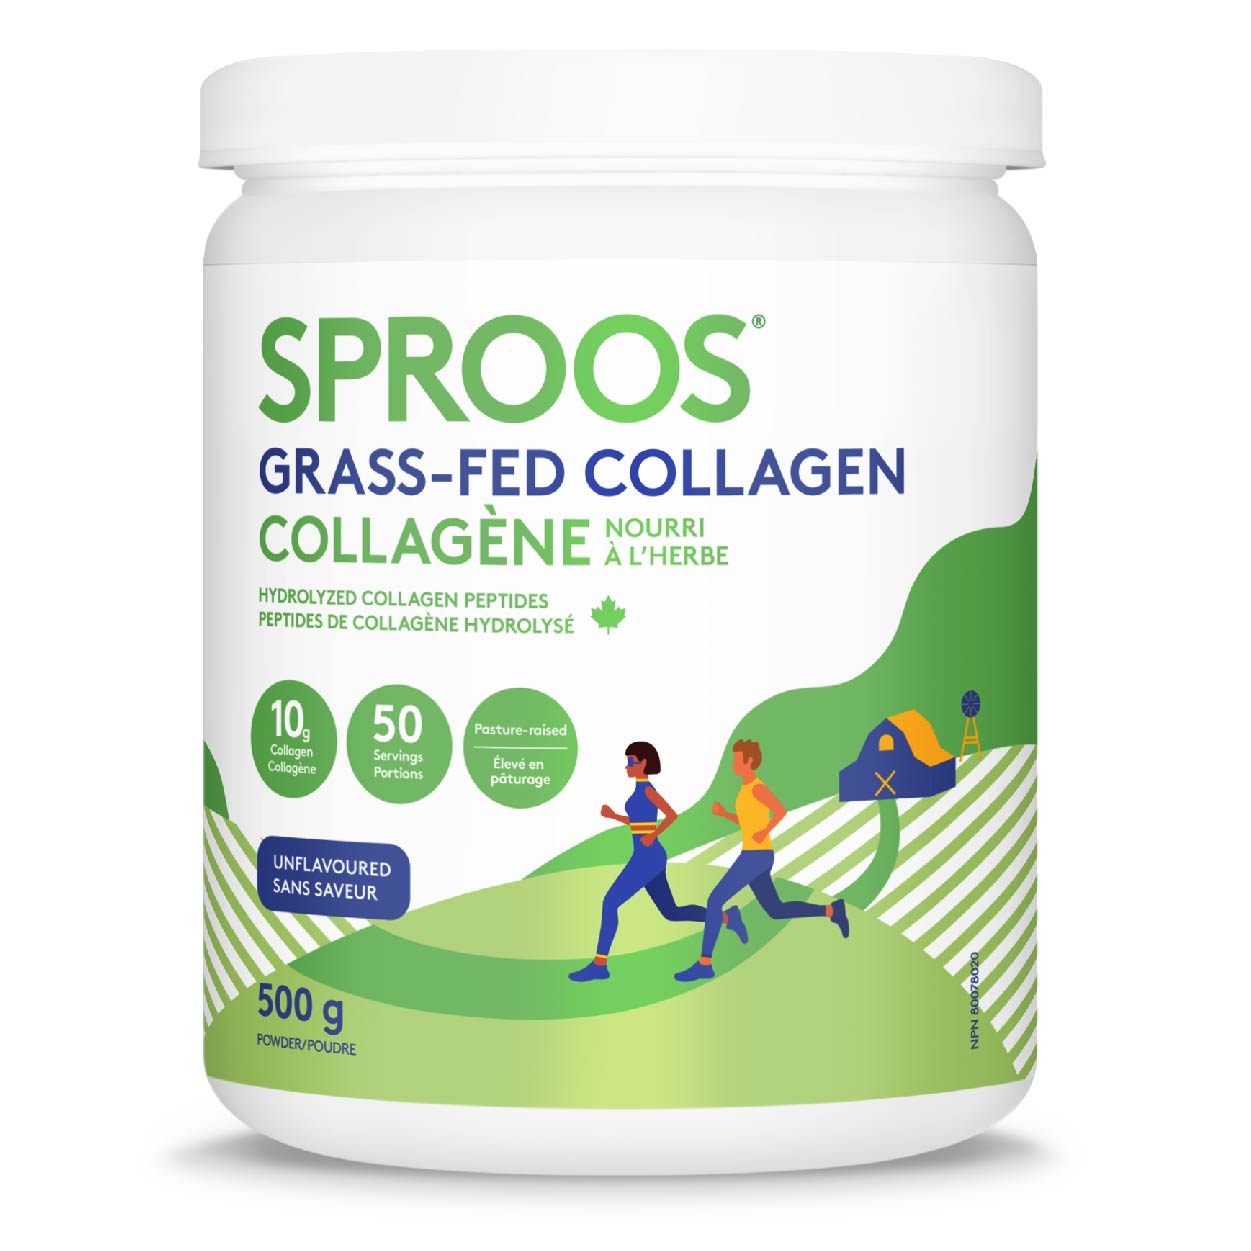 Sproos Grass-Fed Collagen - Large Tub (500g/50 servings)